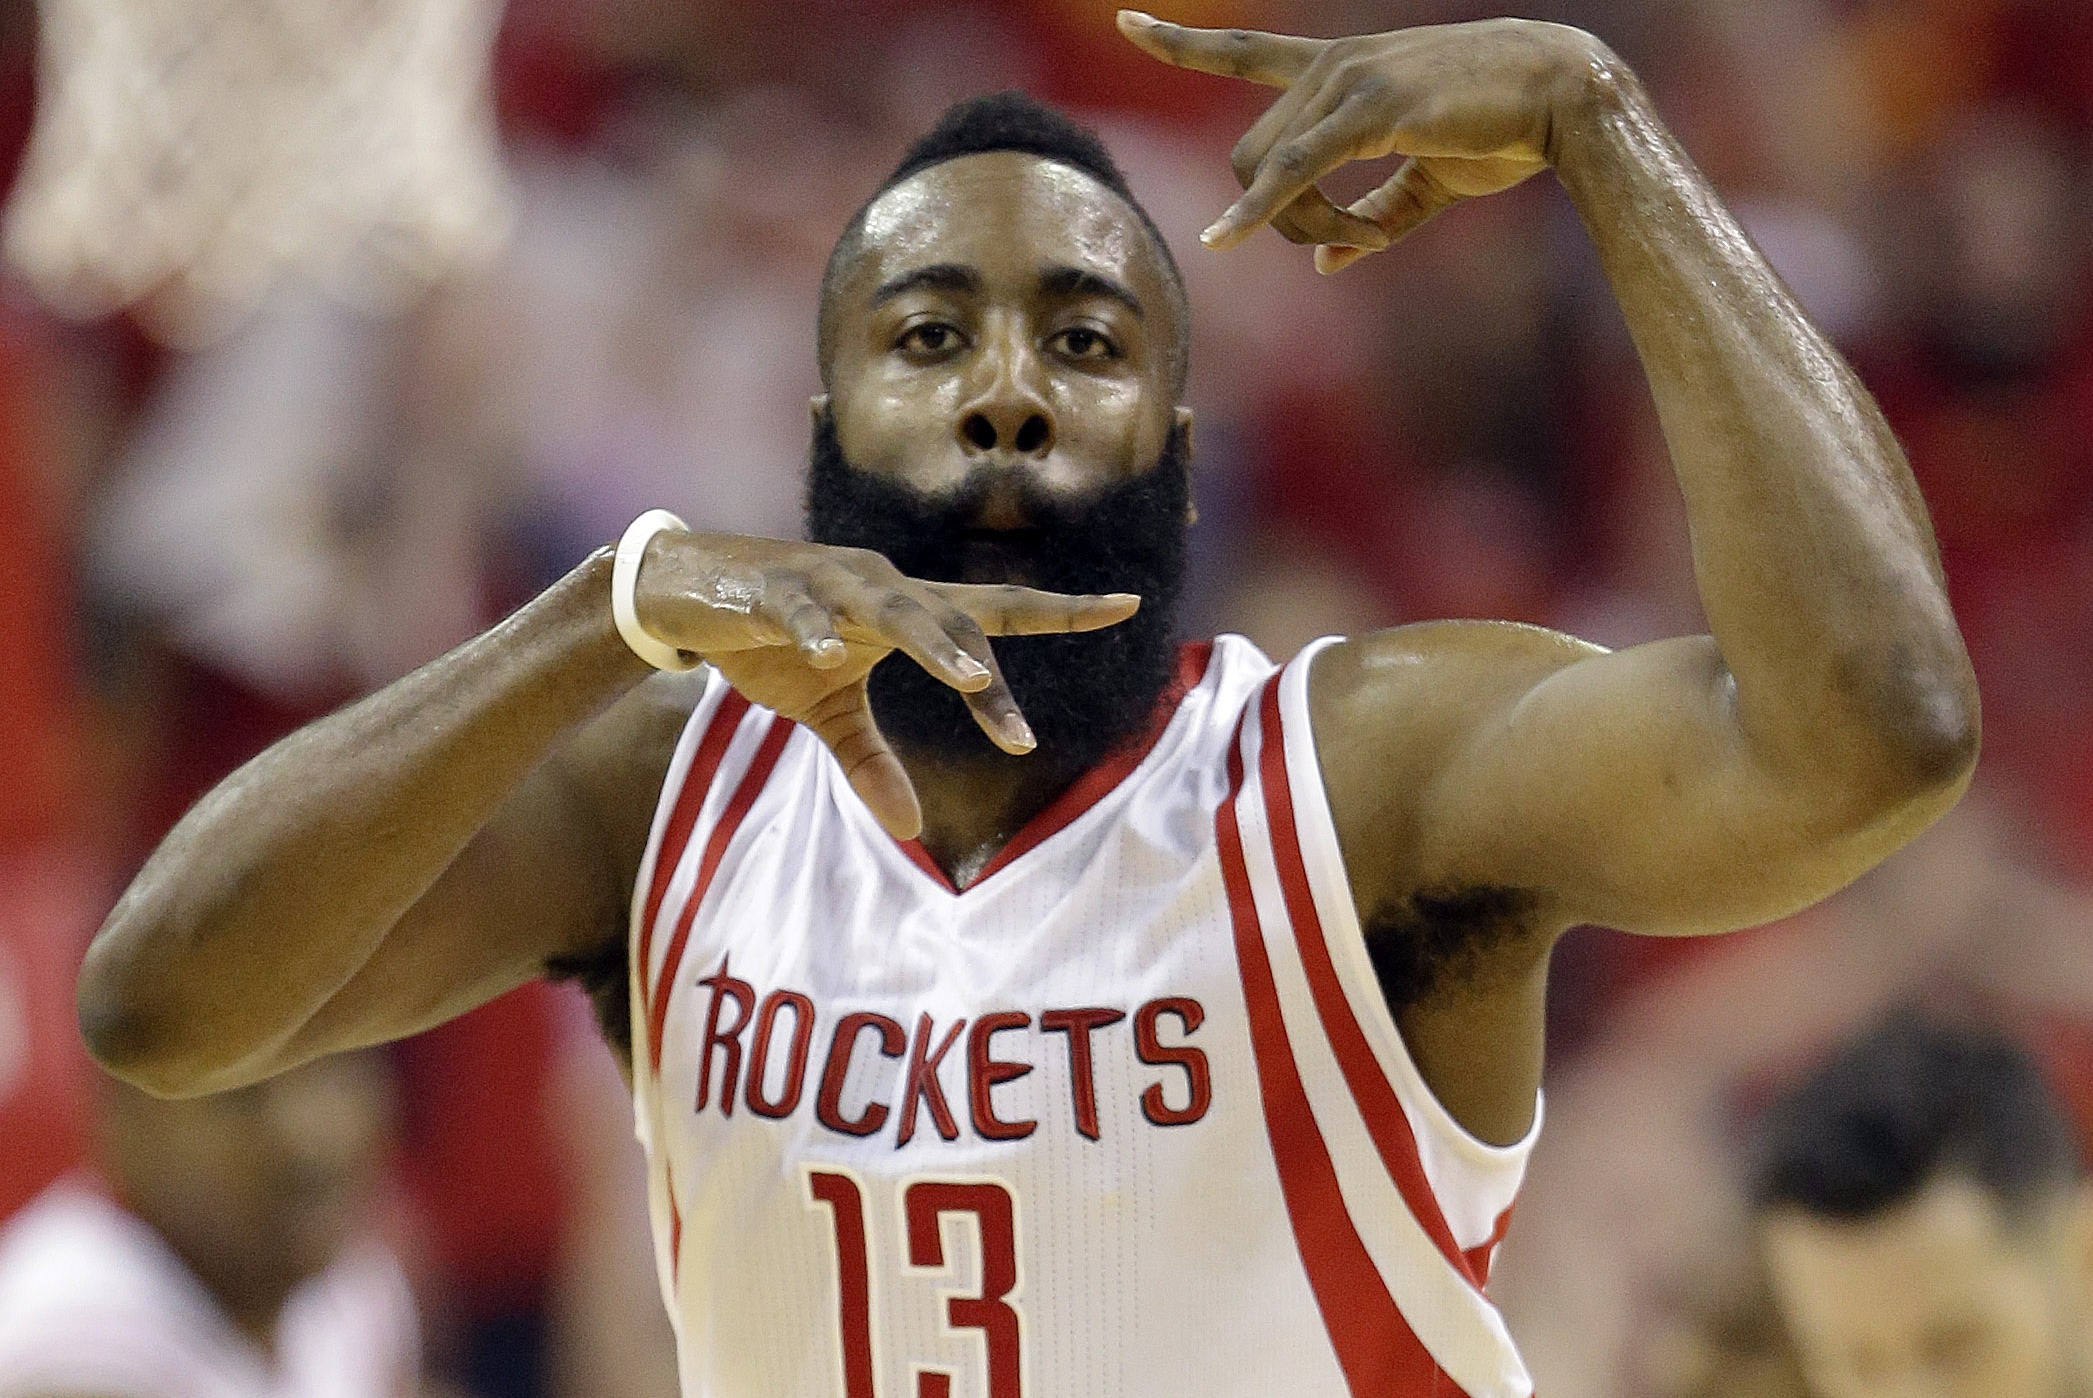 Rockets guard just took one of the worst corner 3s in NBA history